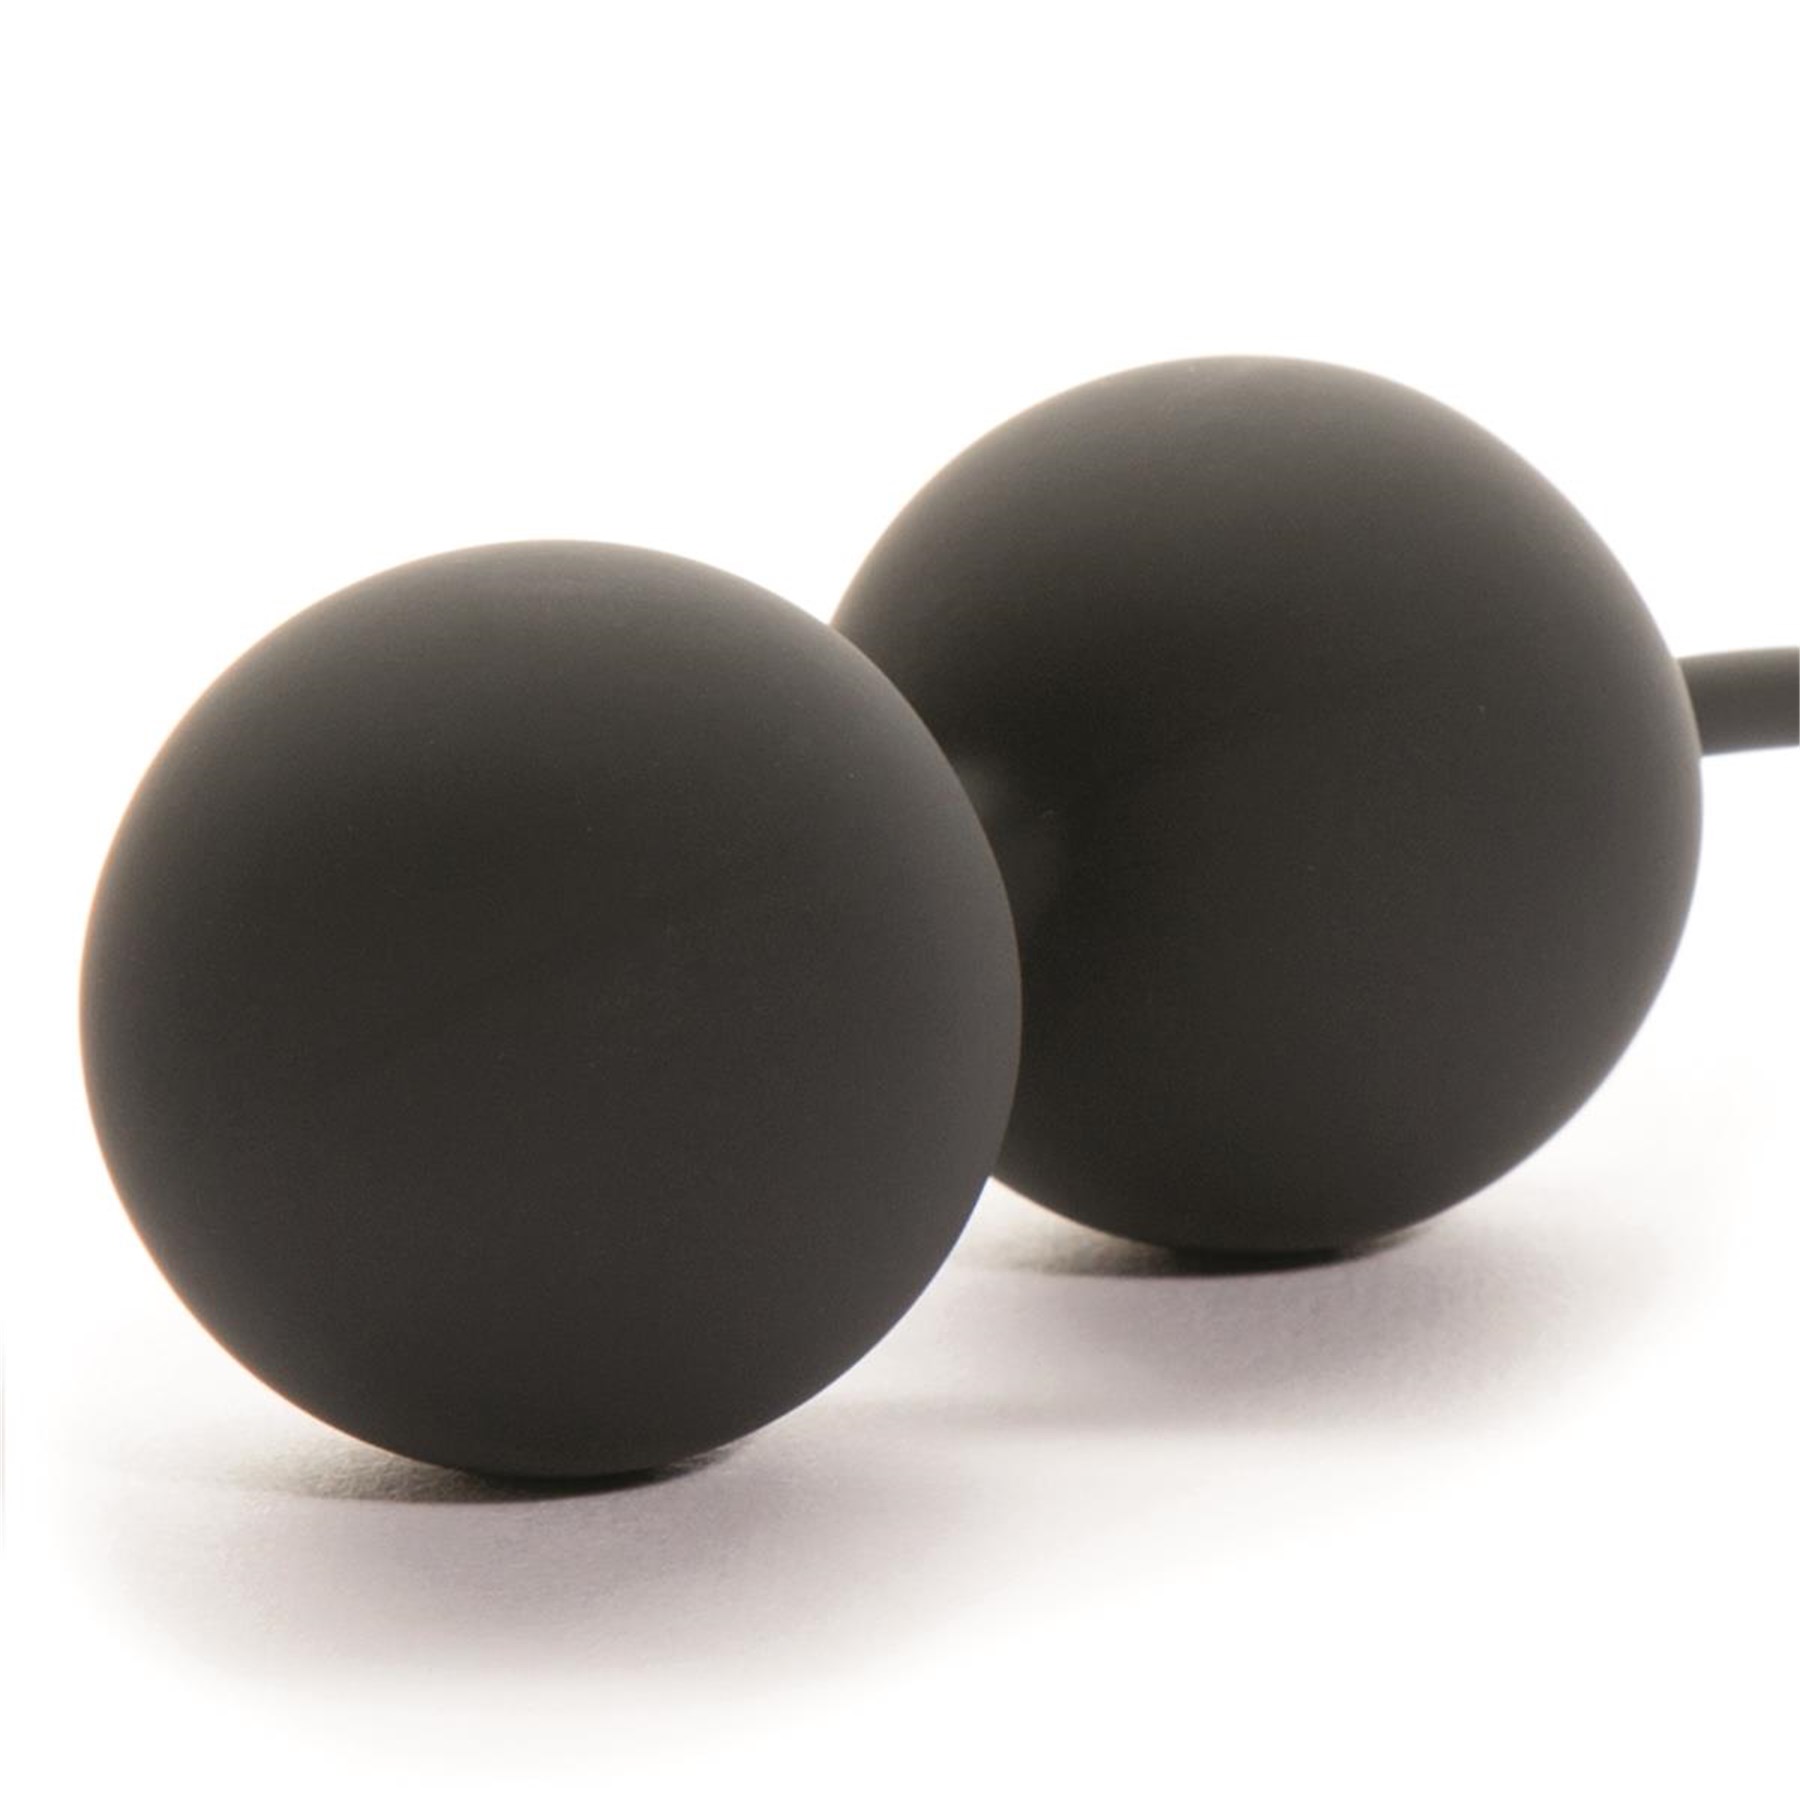 Fifty Shades of Grey Tighten and Tense Jiggle Balls Product Close Up on Balls